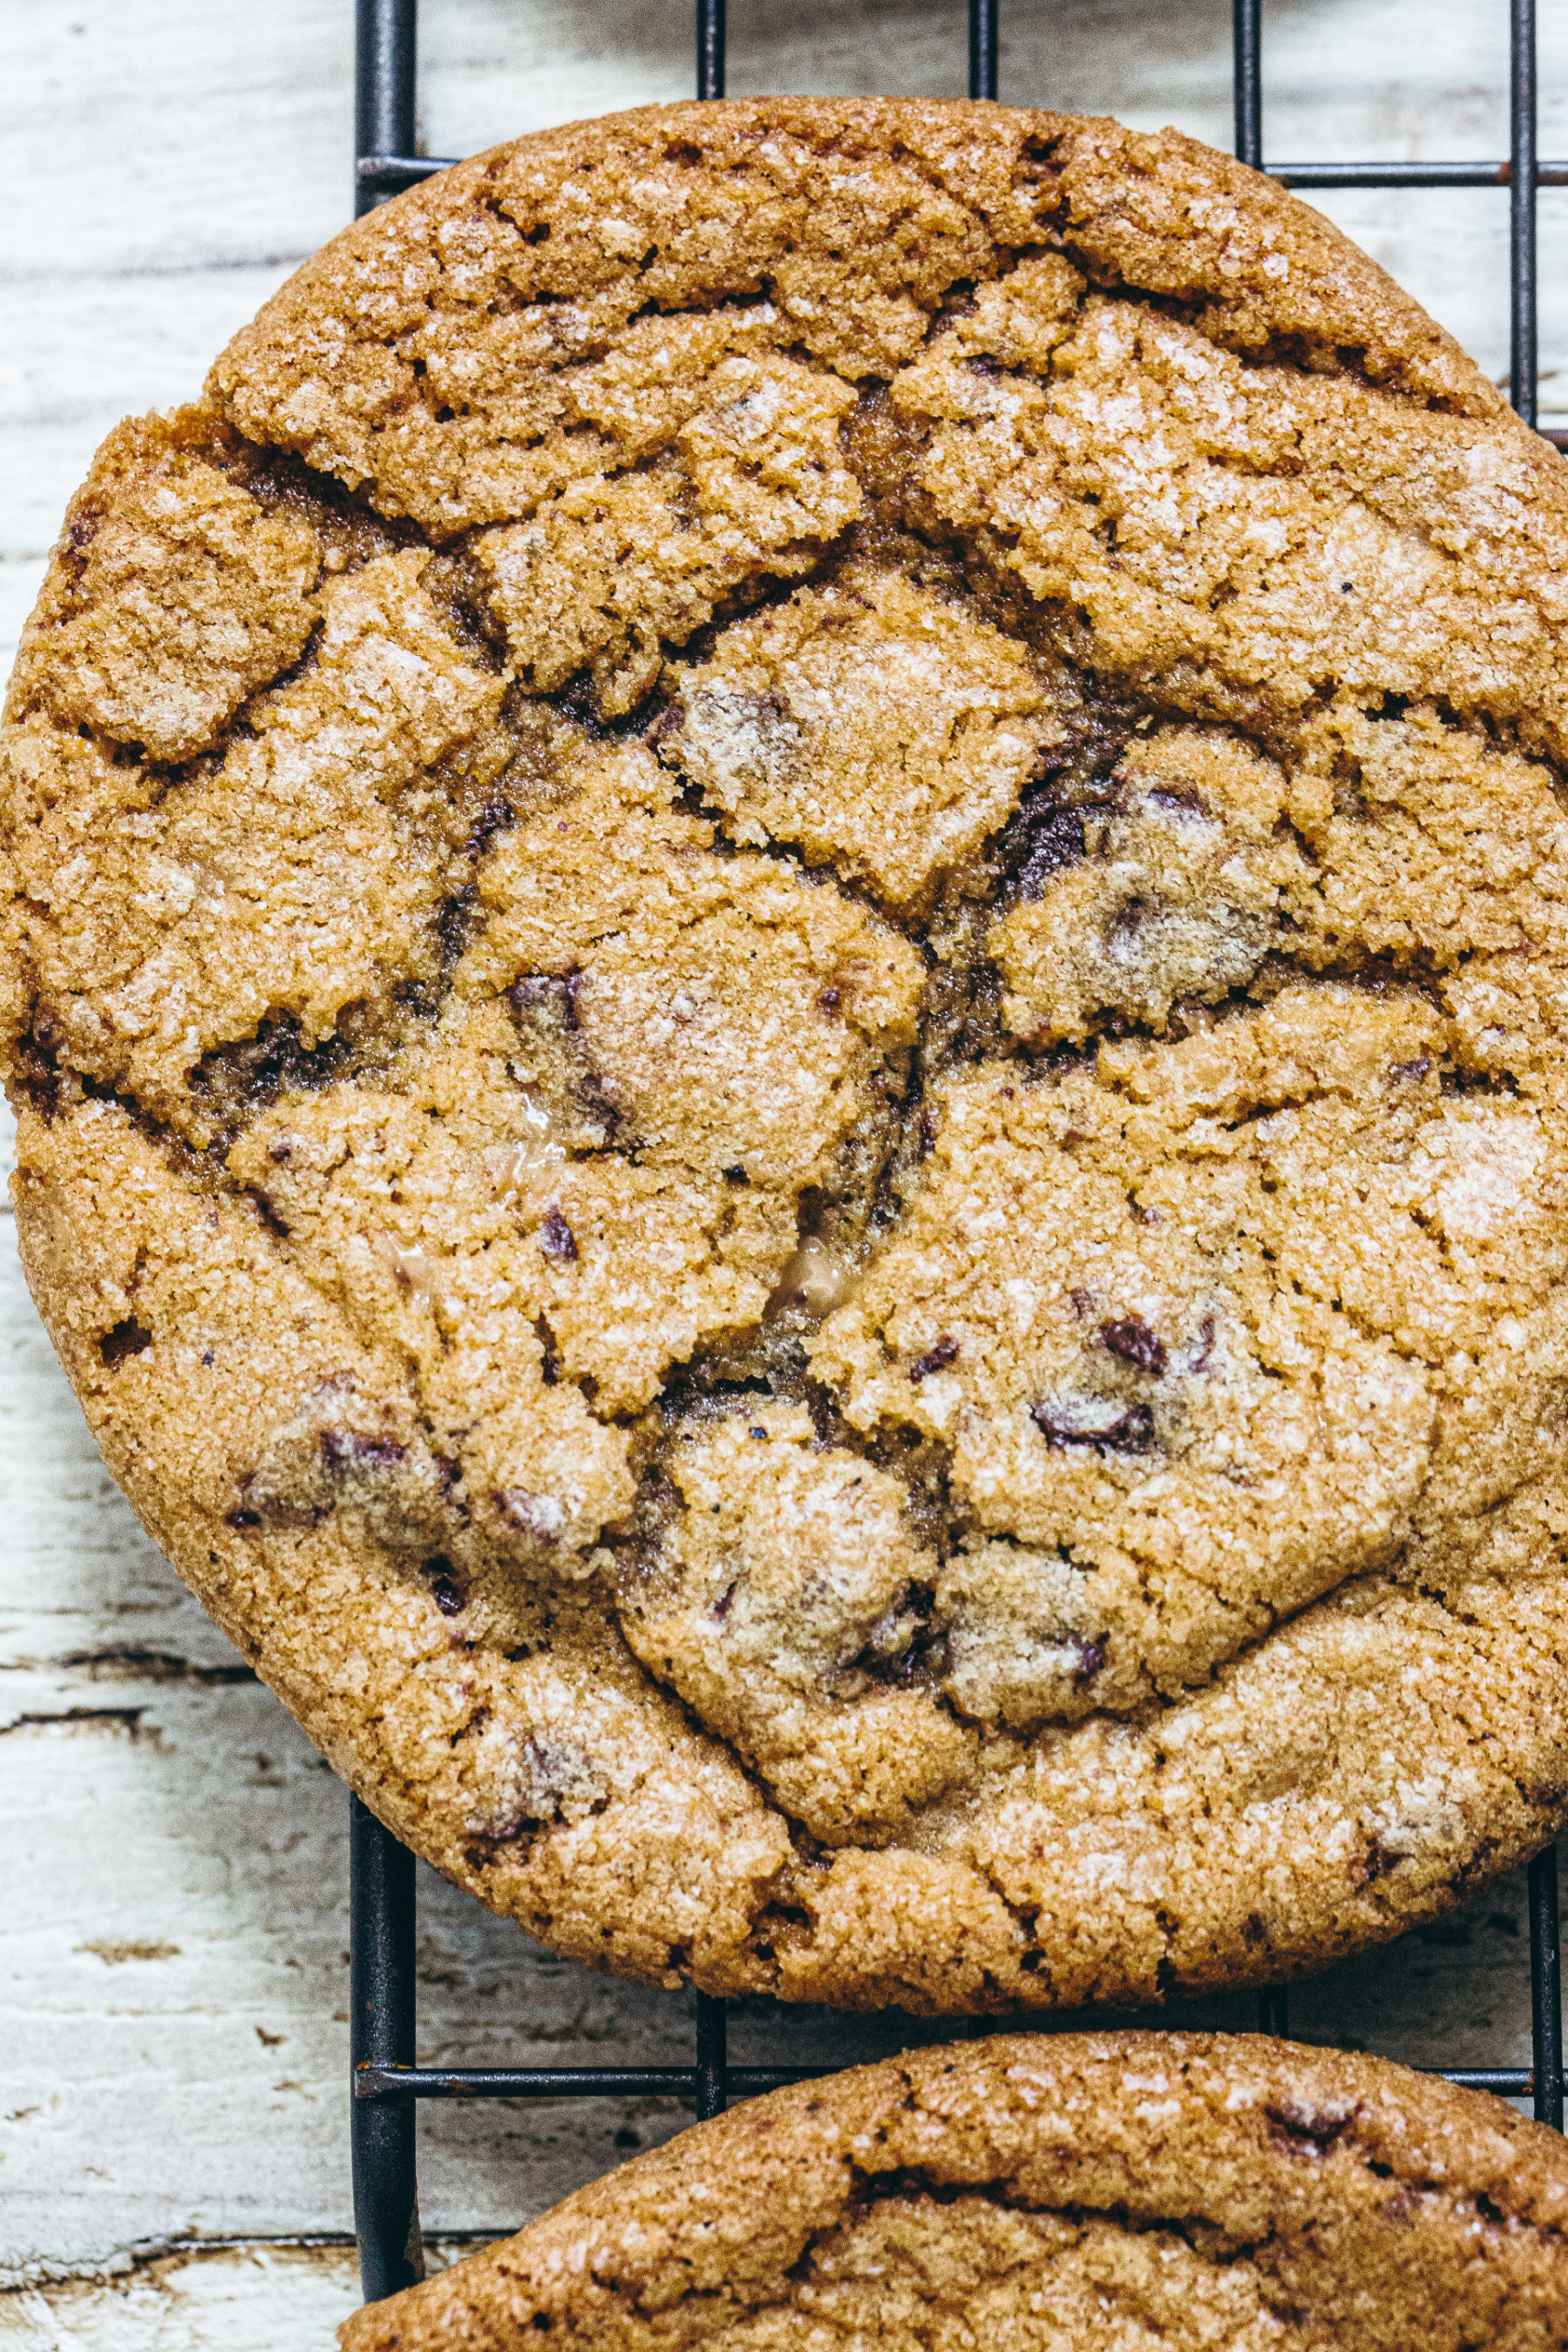 Bacon Fat Chocolate Chip Cookies